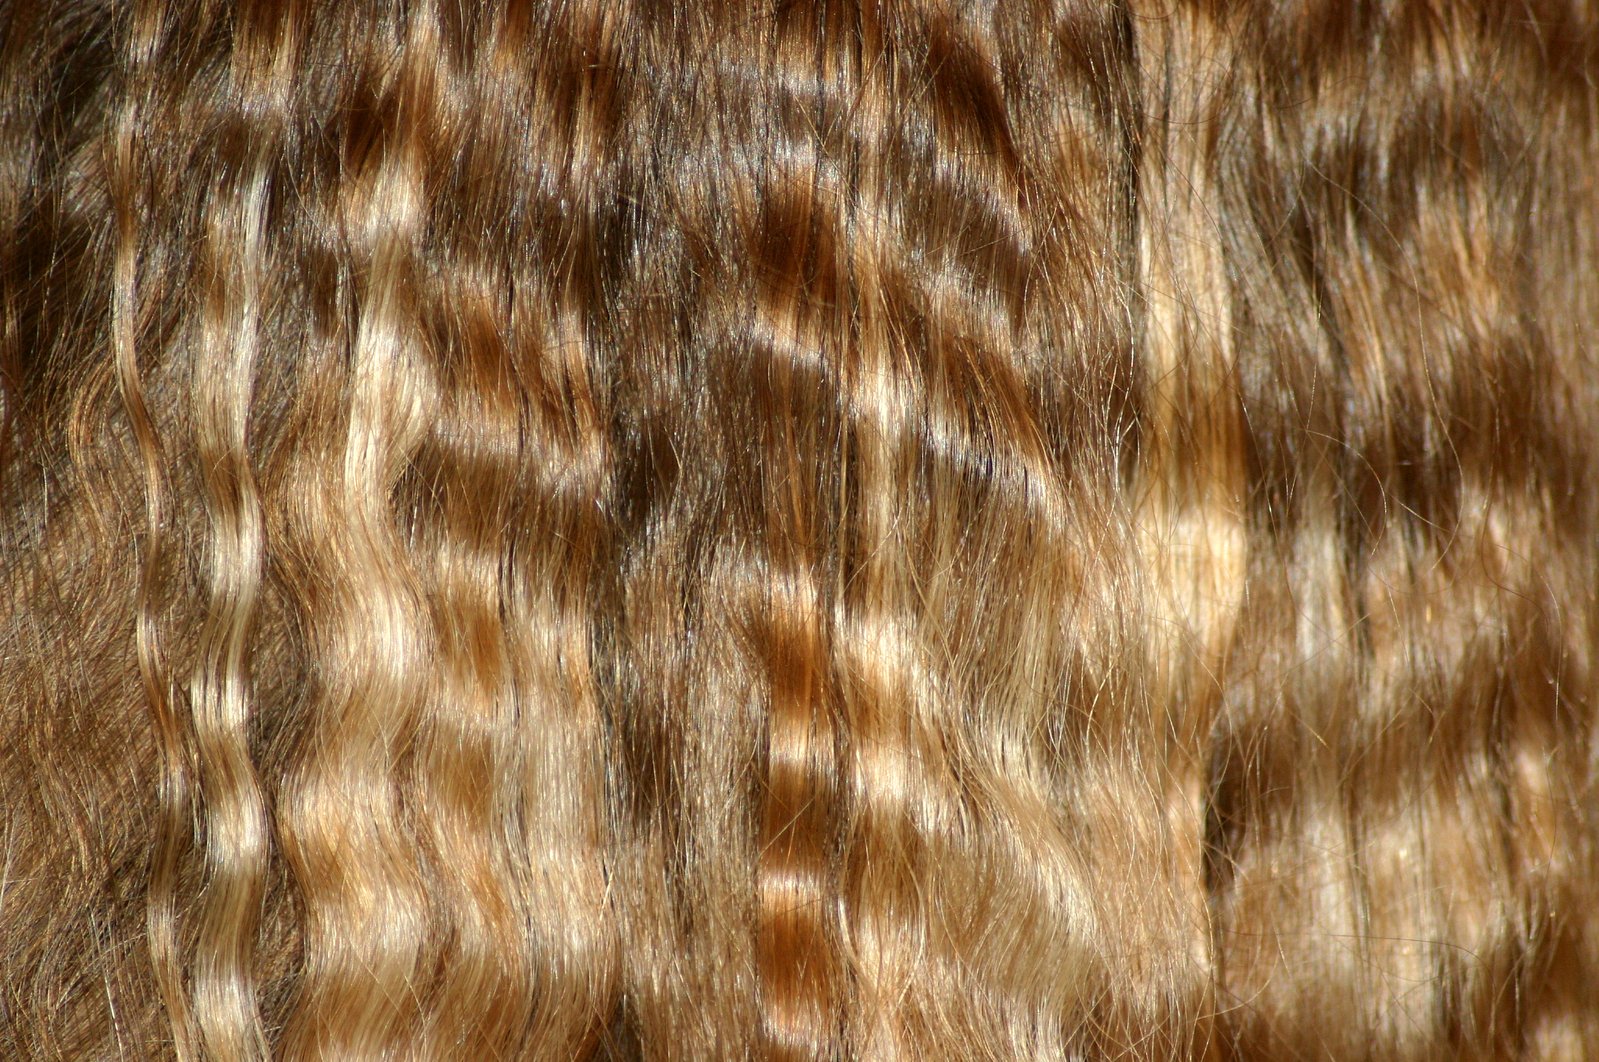 the hair of someone with brown hair is long and wavy